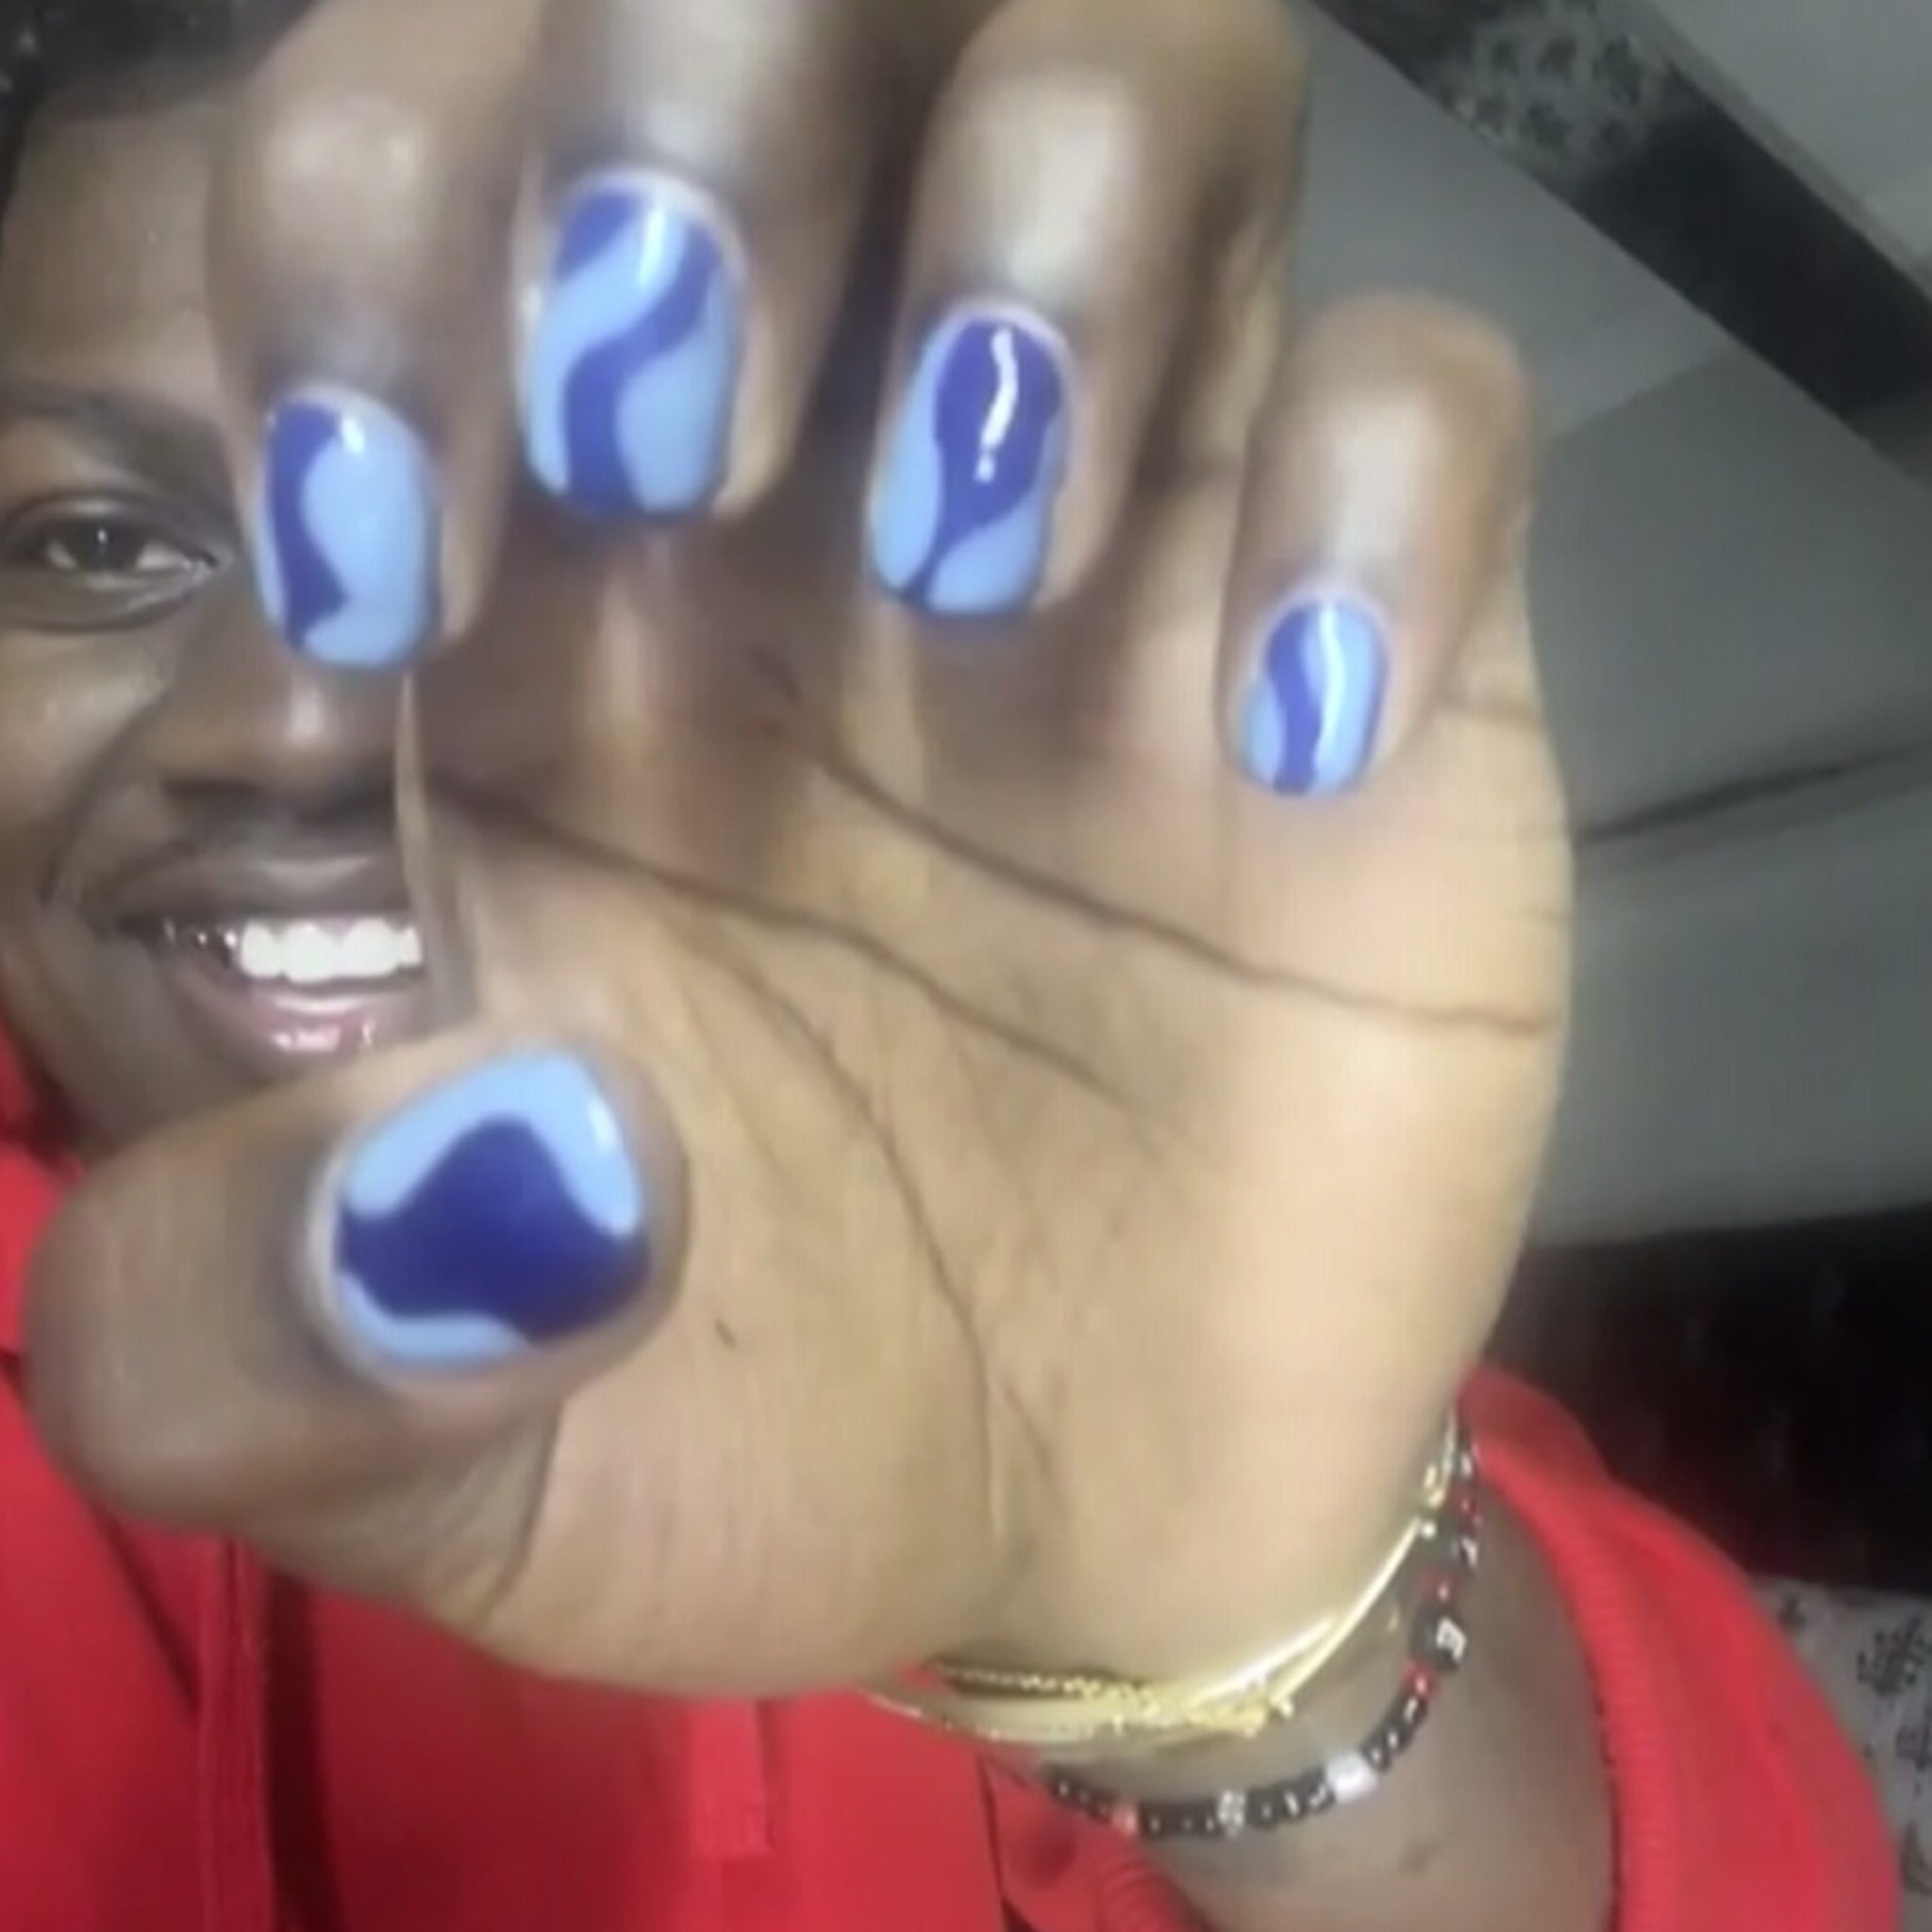 Lil Yachty Tells Guys Why His New Unisex Nail Paint Brand is for Them